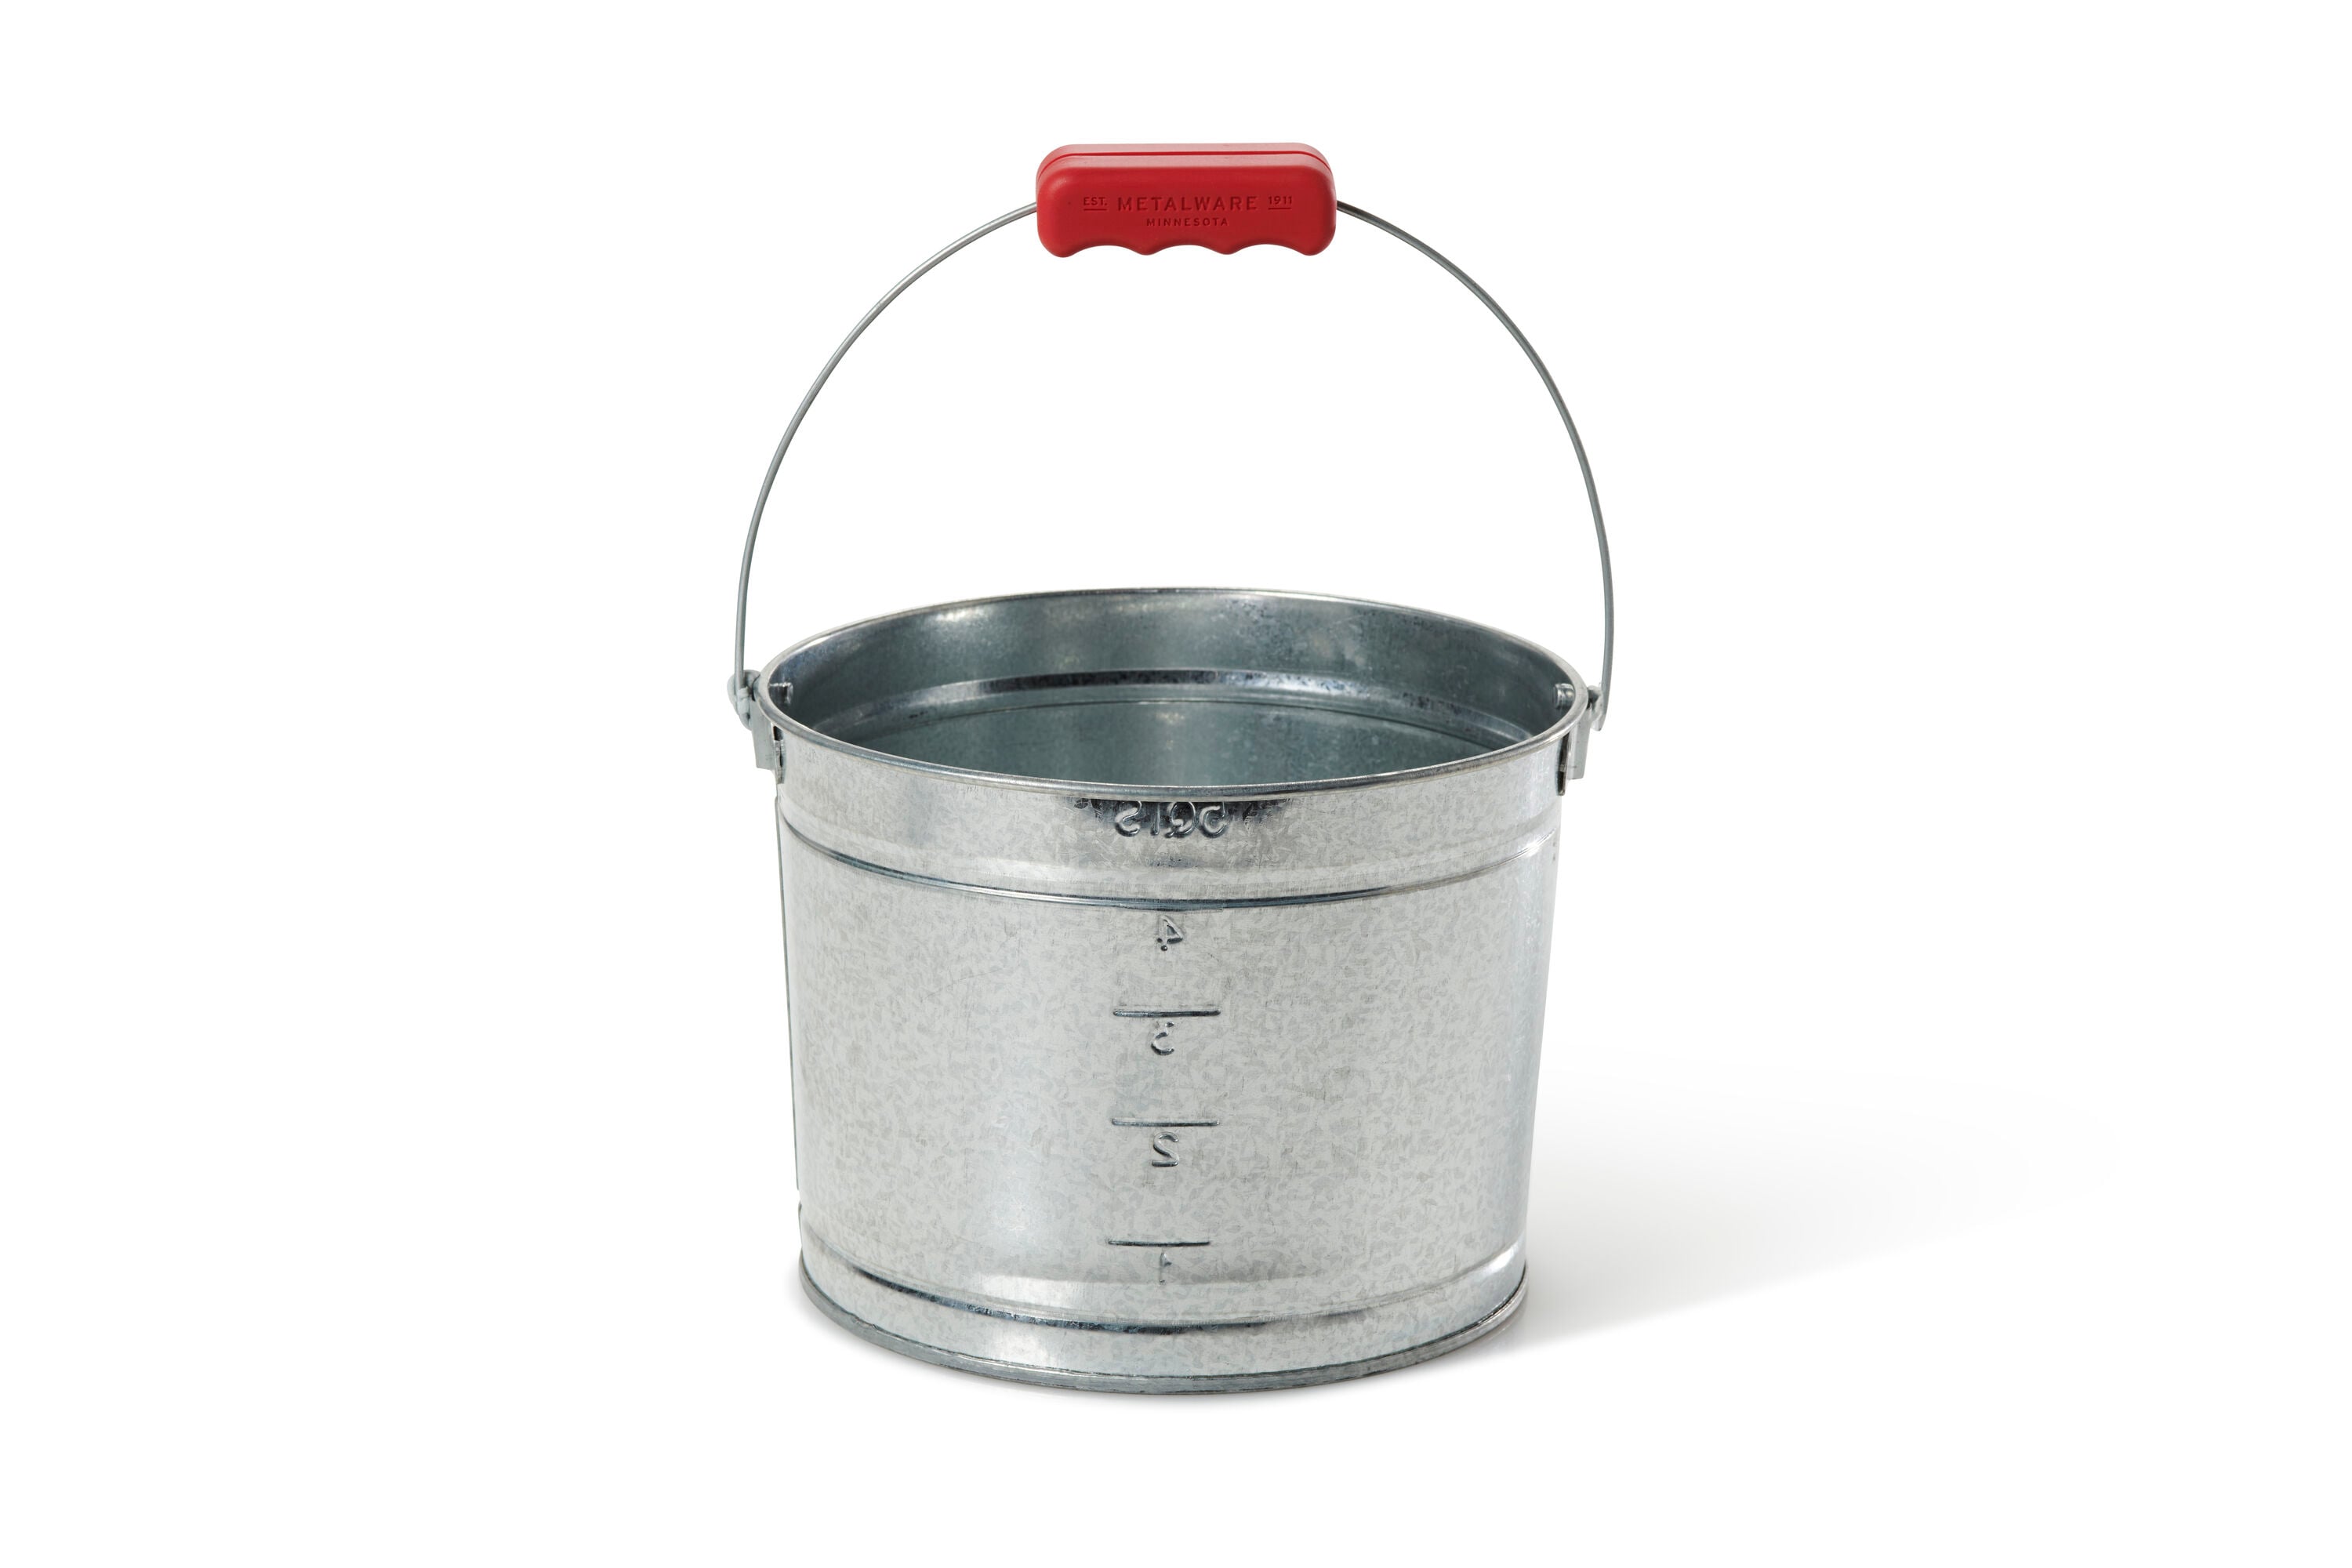 Omega Industrial 5.5 qt. Galvanized Metal Bucket at Tractor Supply Co.